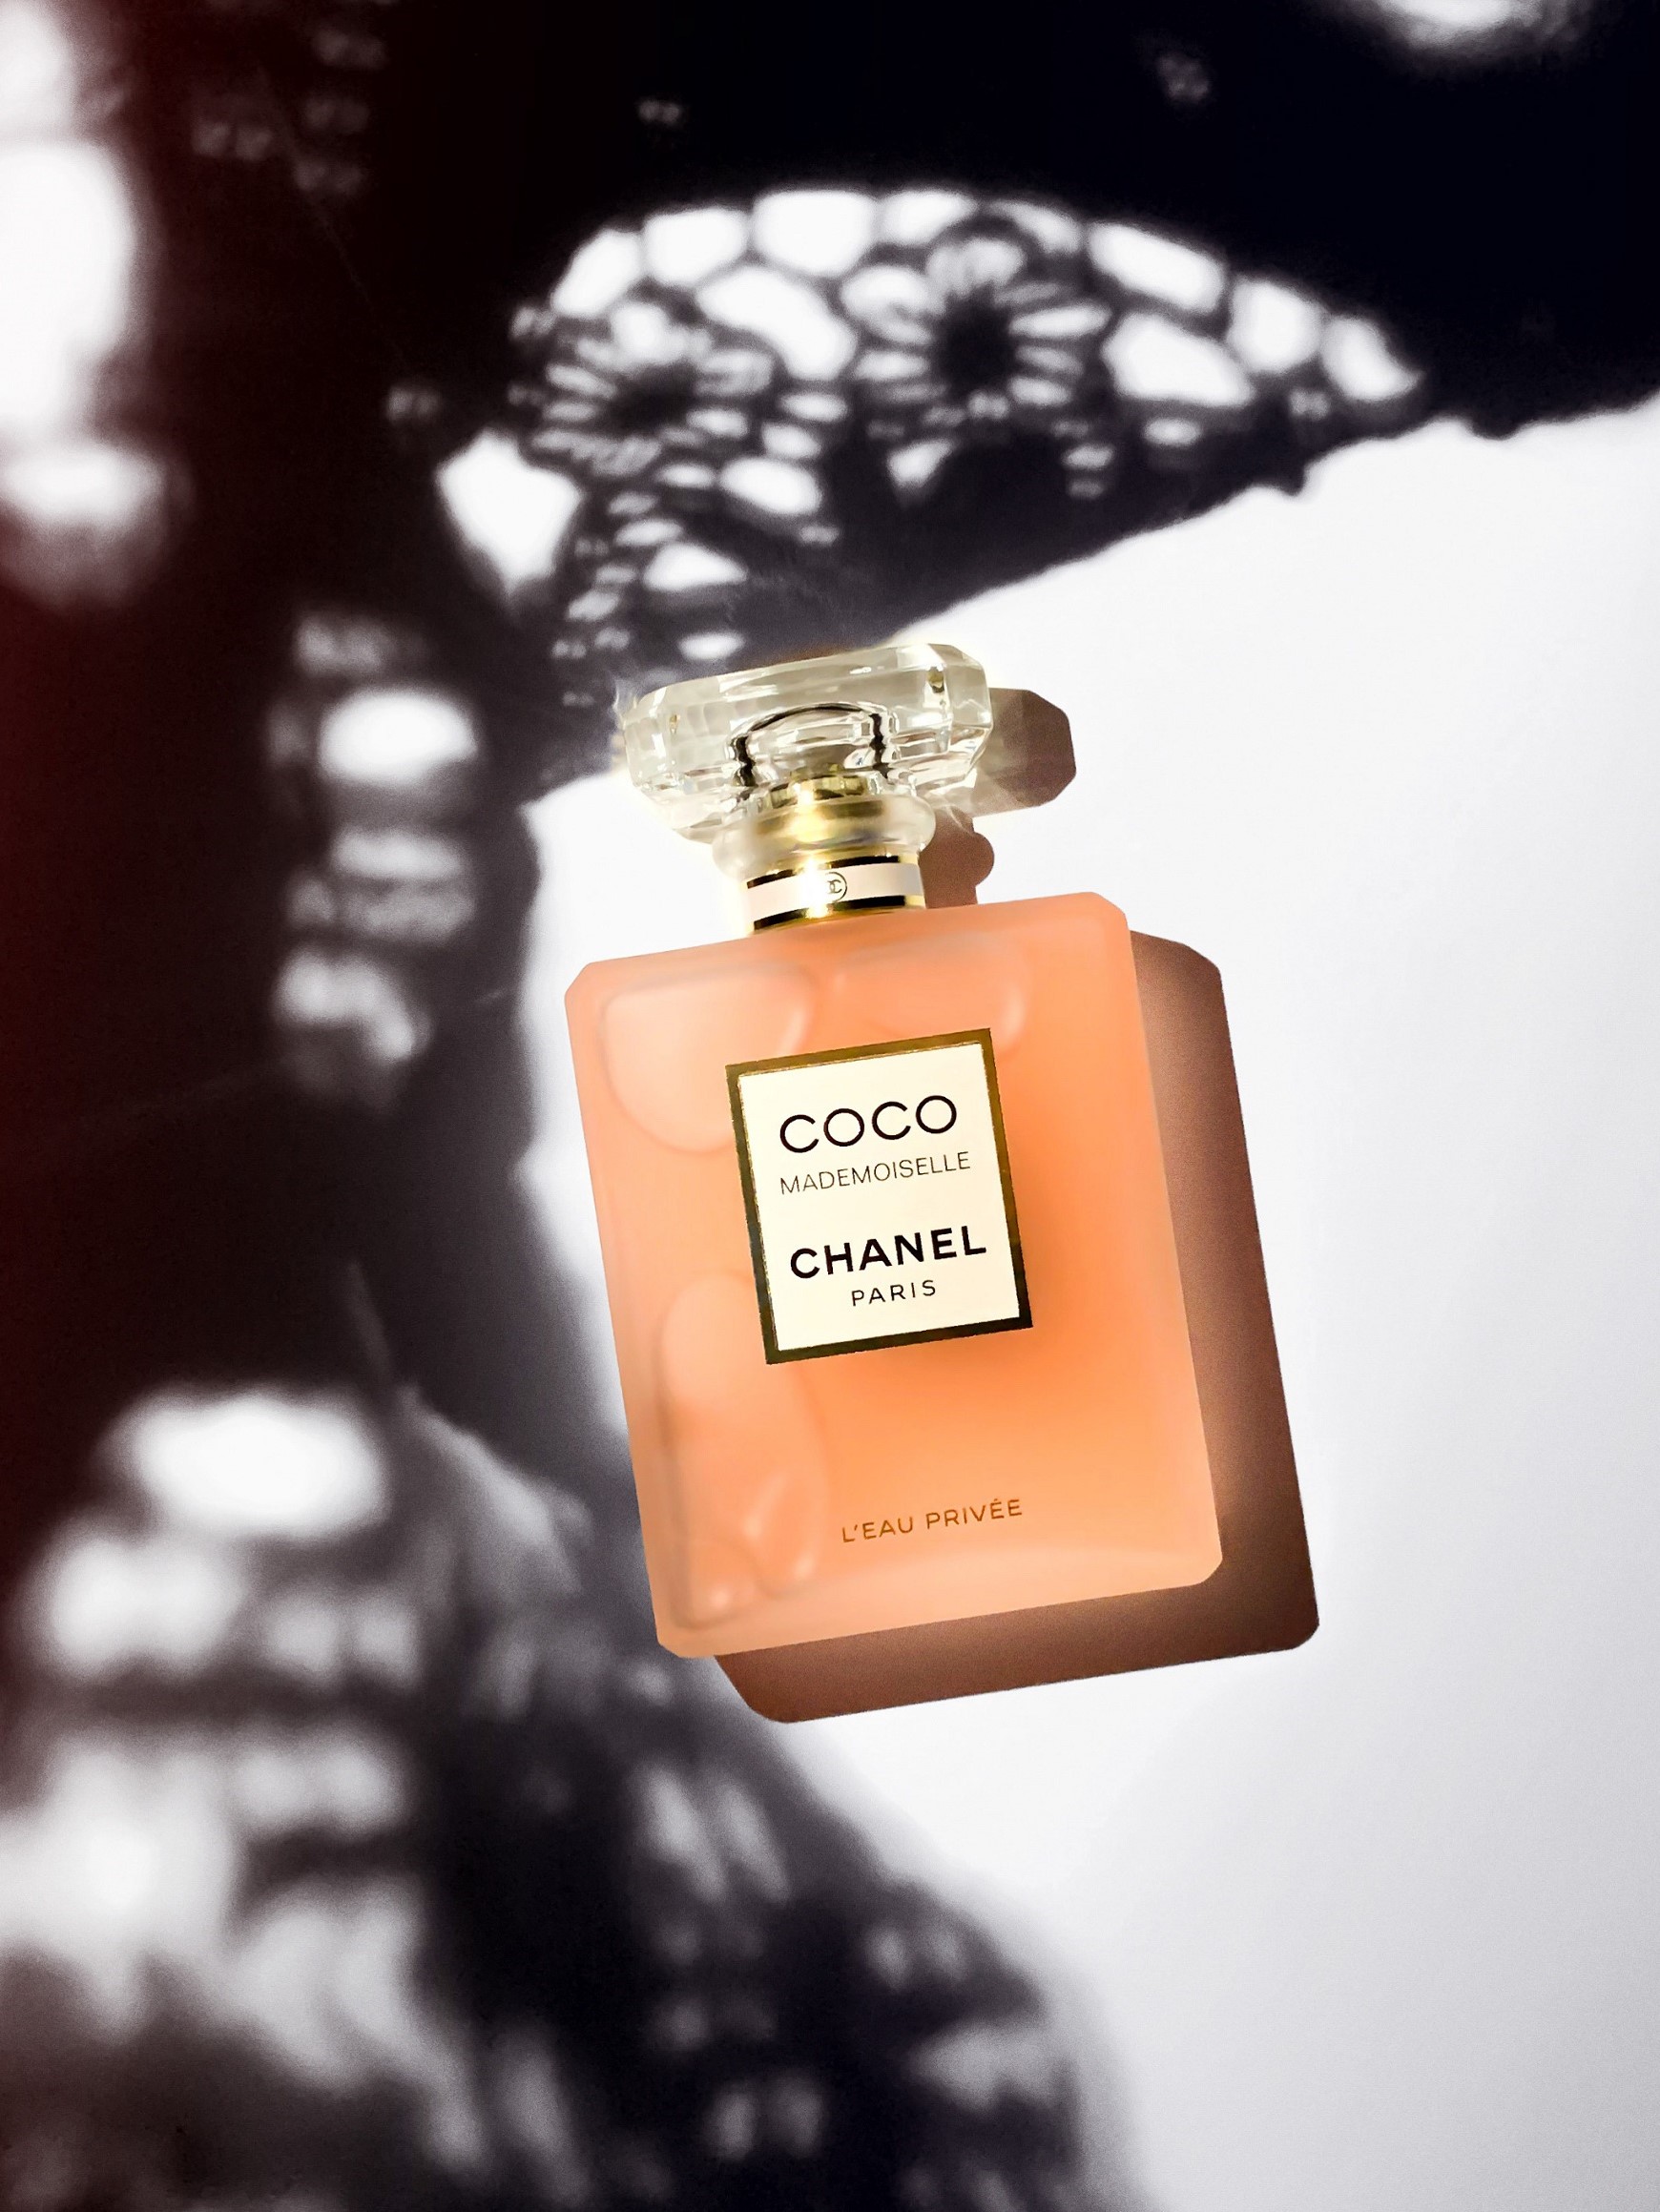 Chanel Coco Mademoiselle : Perfume and Dry Oil Review - Bois de Jasmin